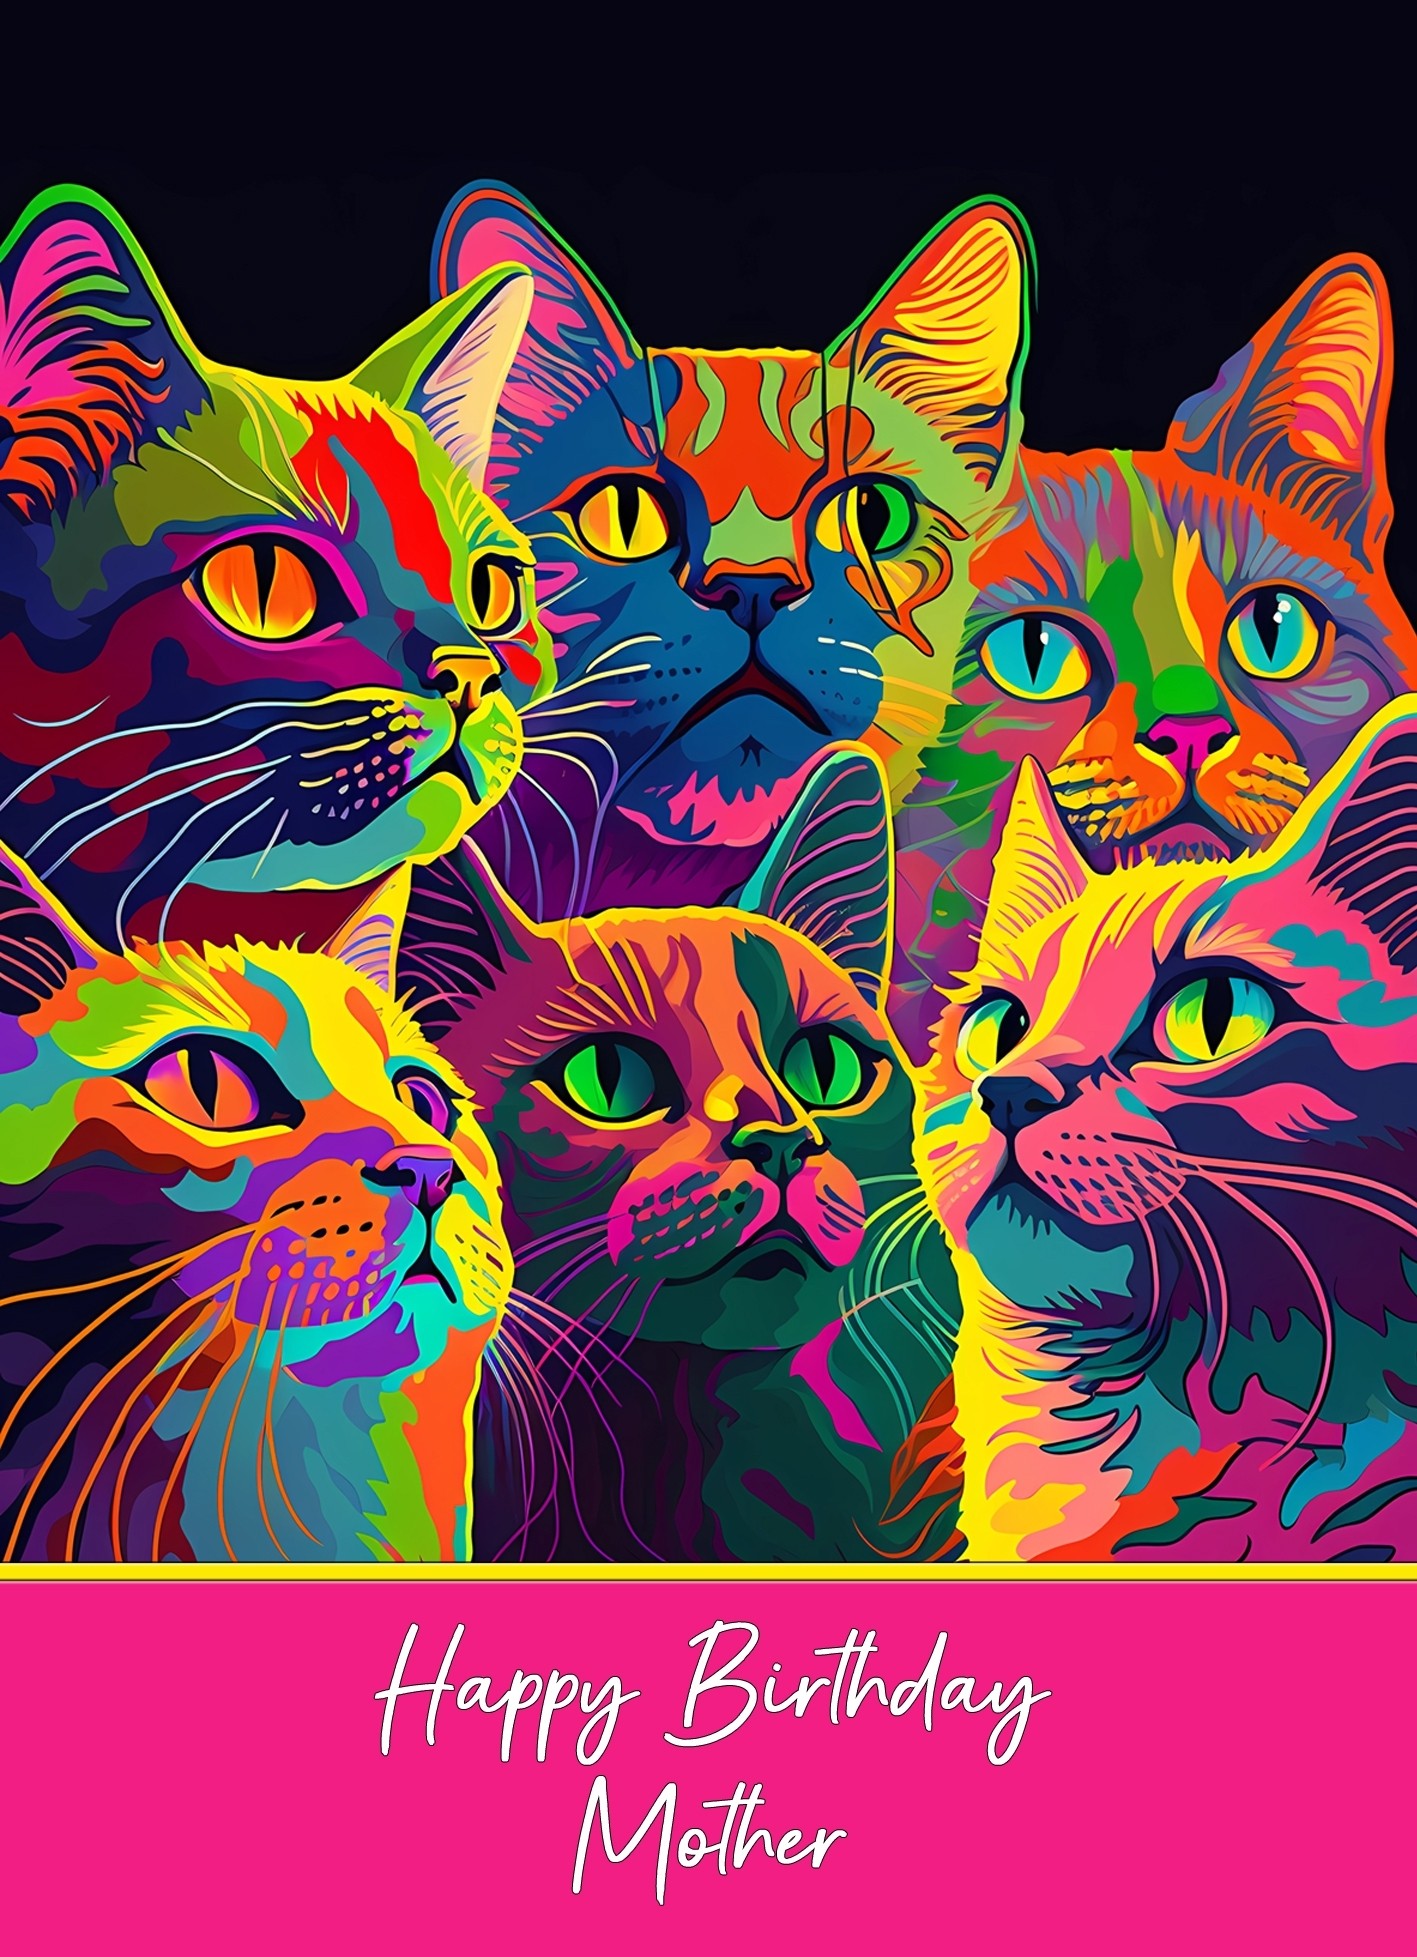 Birthday Card For Mother (Colourful Cat Art)